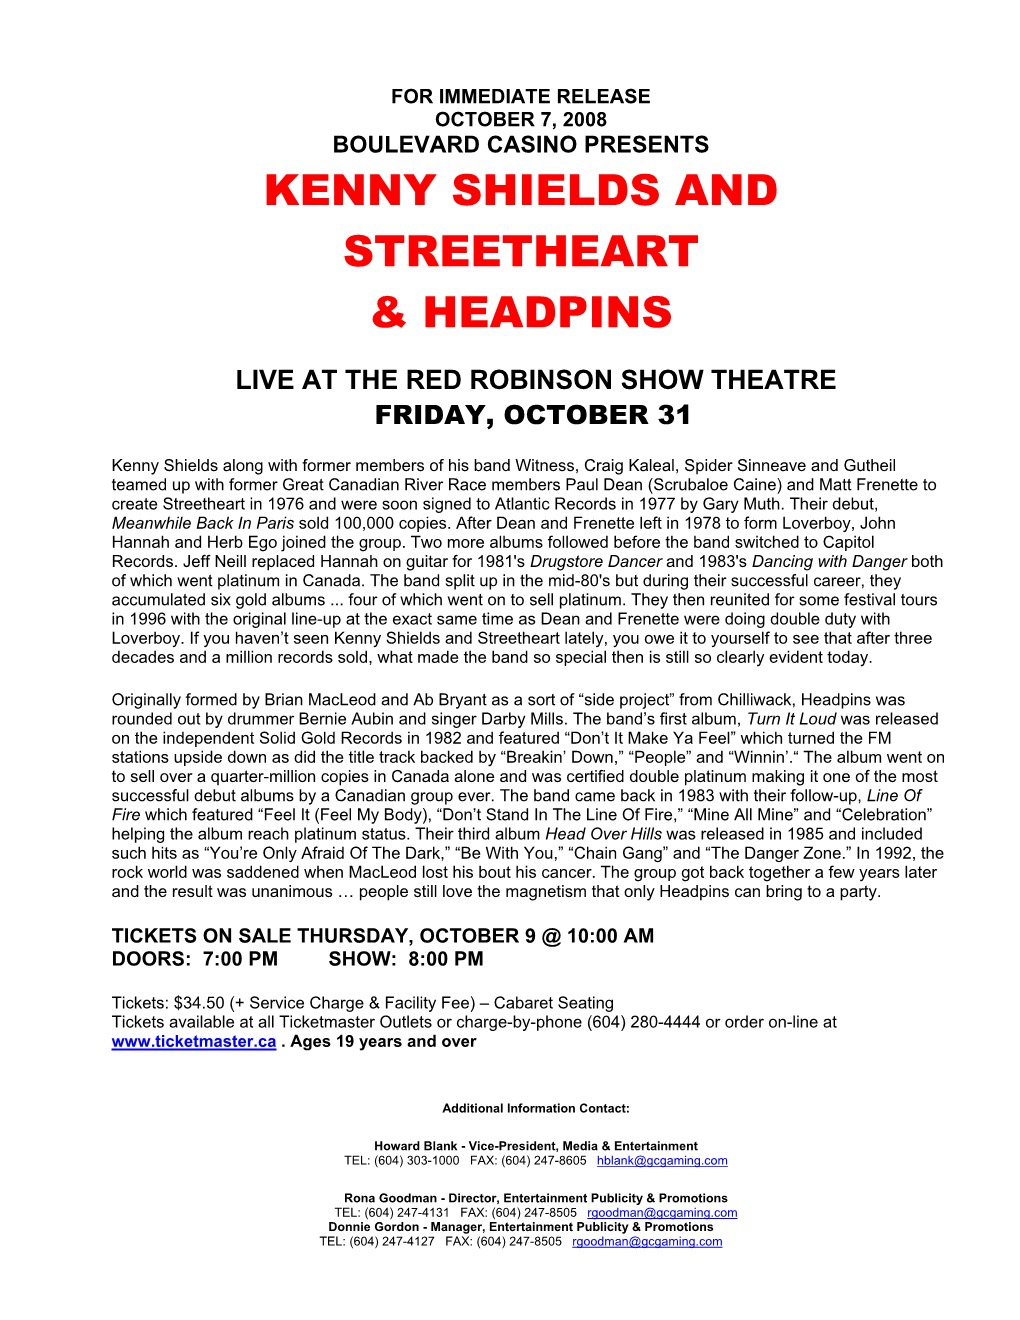 For Immediate Release October 7, 2008 Boulevard Casino Presents Kenny Shields and Streetheart